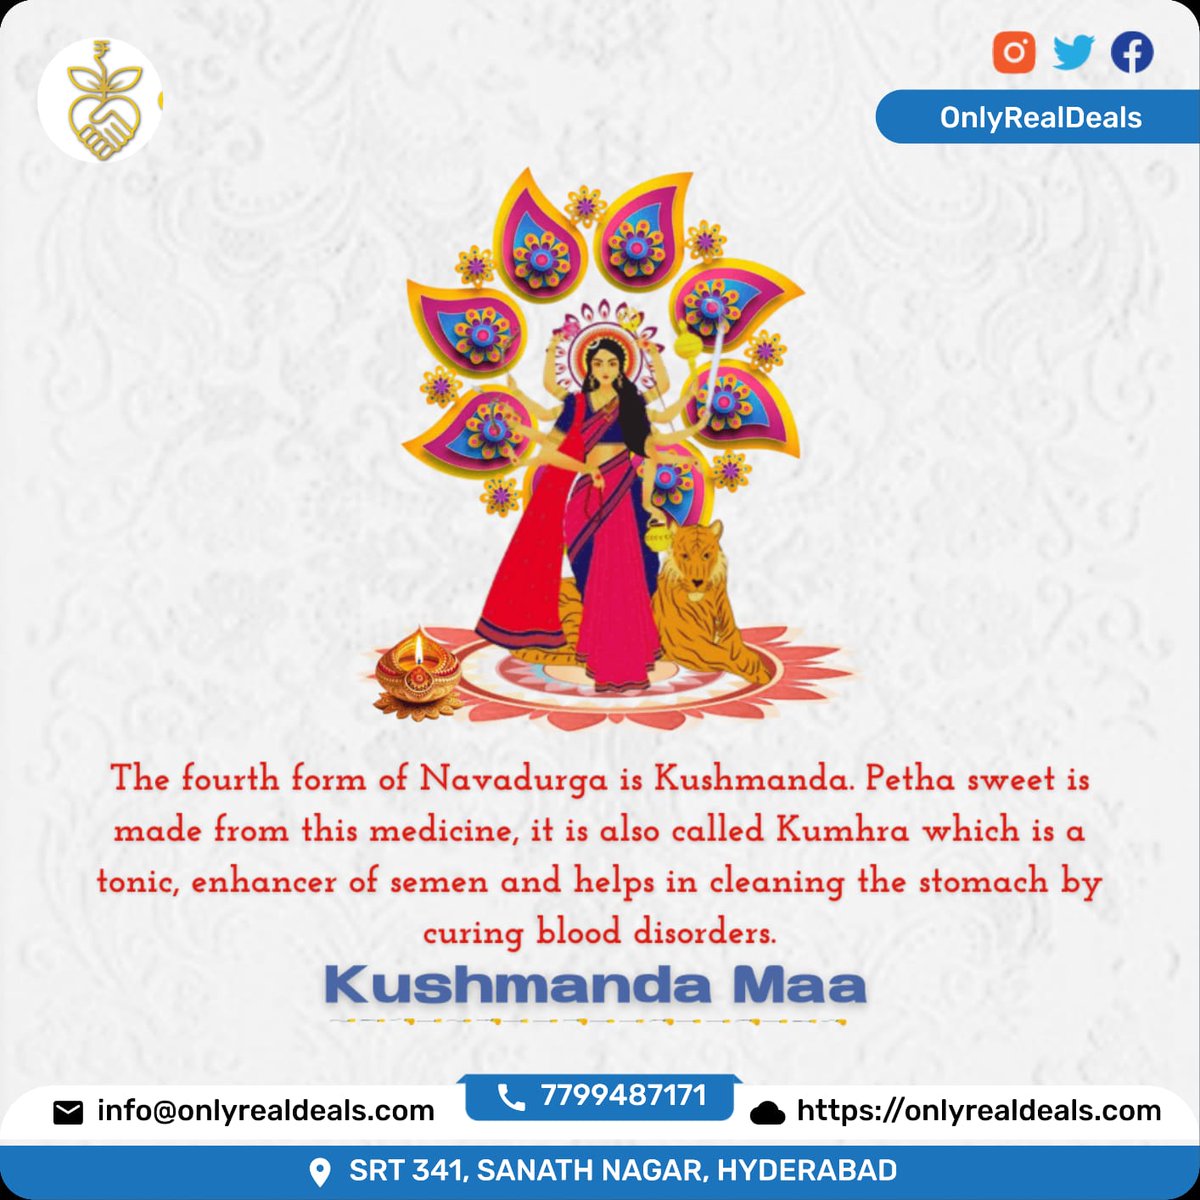 💐 On the Dussehra fourth day, inspired by Maa Kushmanda, may your property endeavors blossom with creativity and financial prosperity. Happy Navratri and may your new home be filled with abundance and happiness! #PropertyBlessings #AbundantLiving 🌷 #OnlyRealDeals